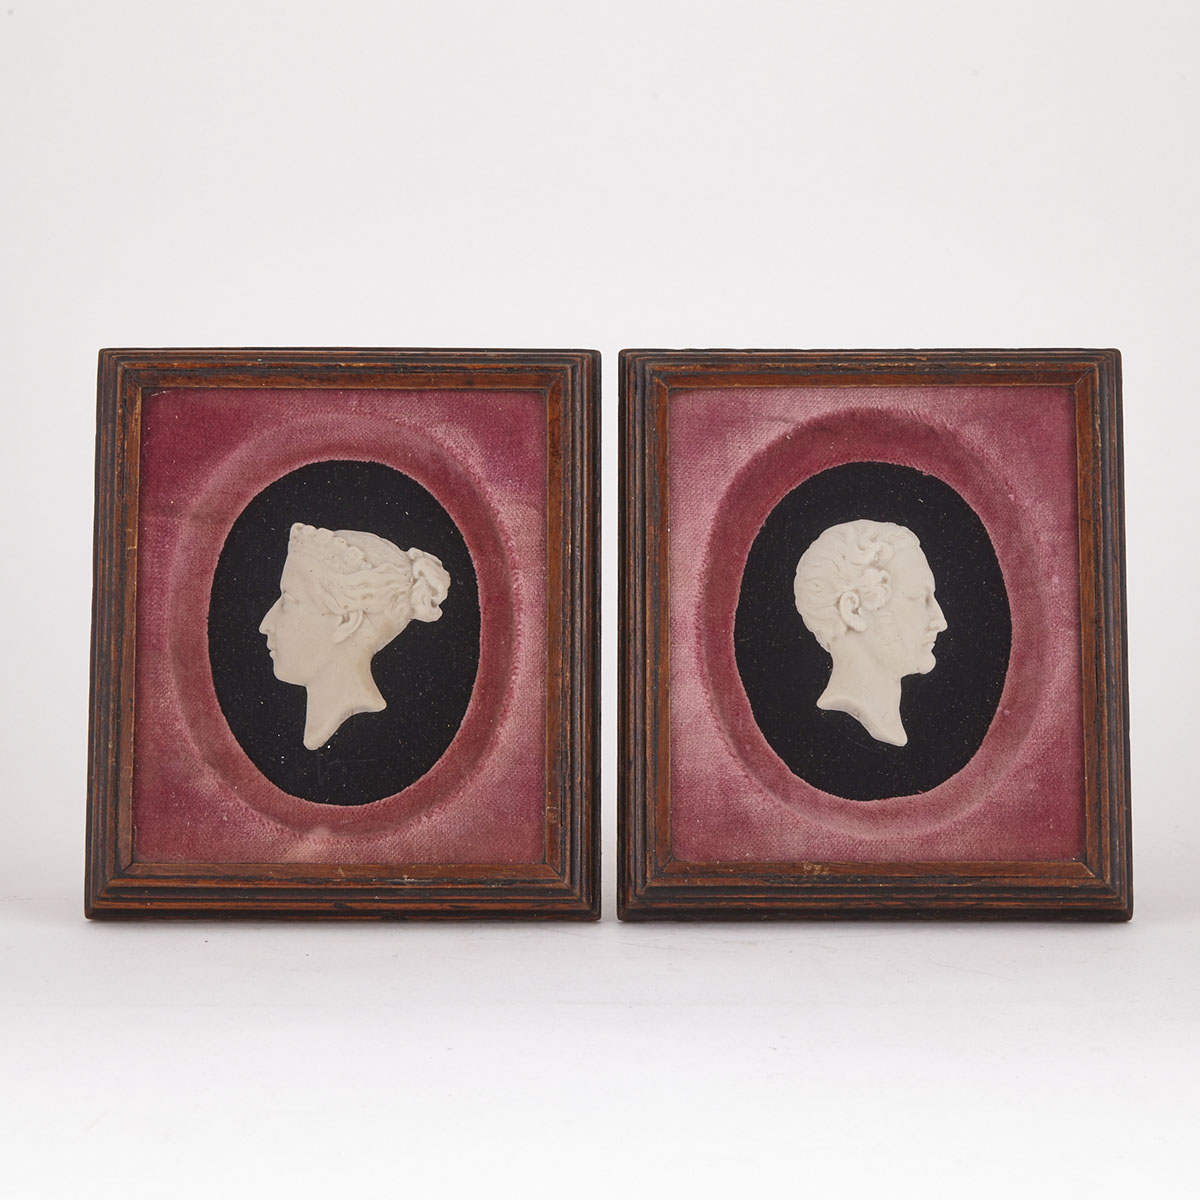 Pair of Tassie Style Wax Relief Silhouette Medallions of Victoria and Albert, 19th century